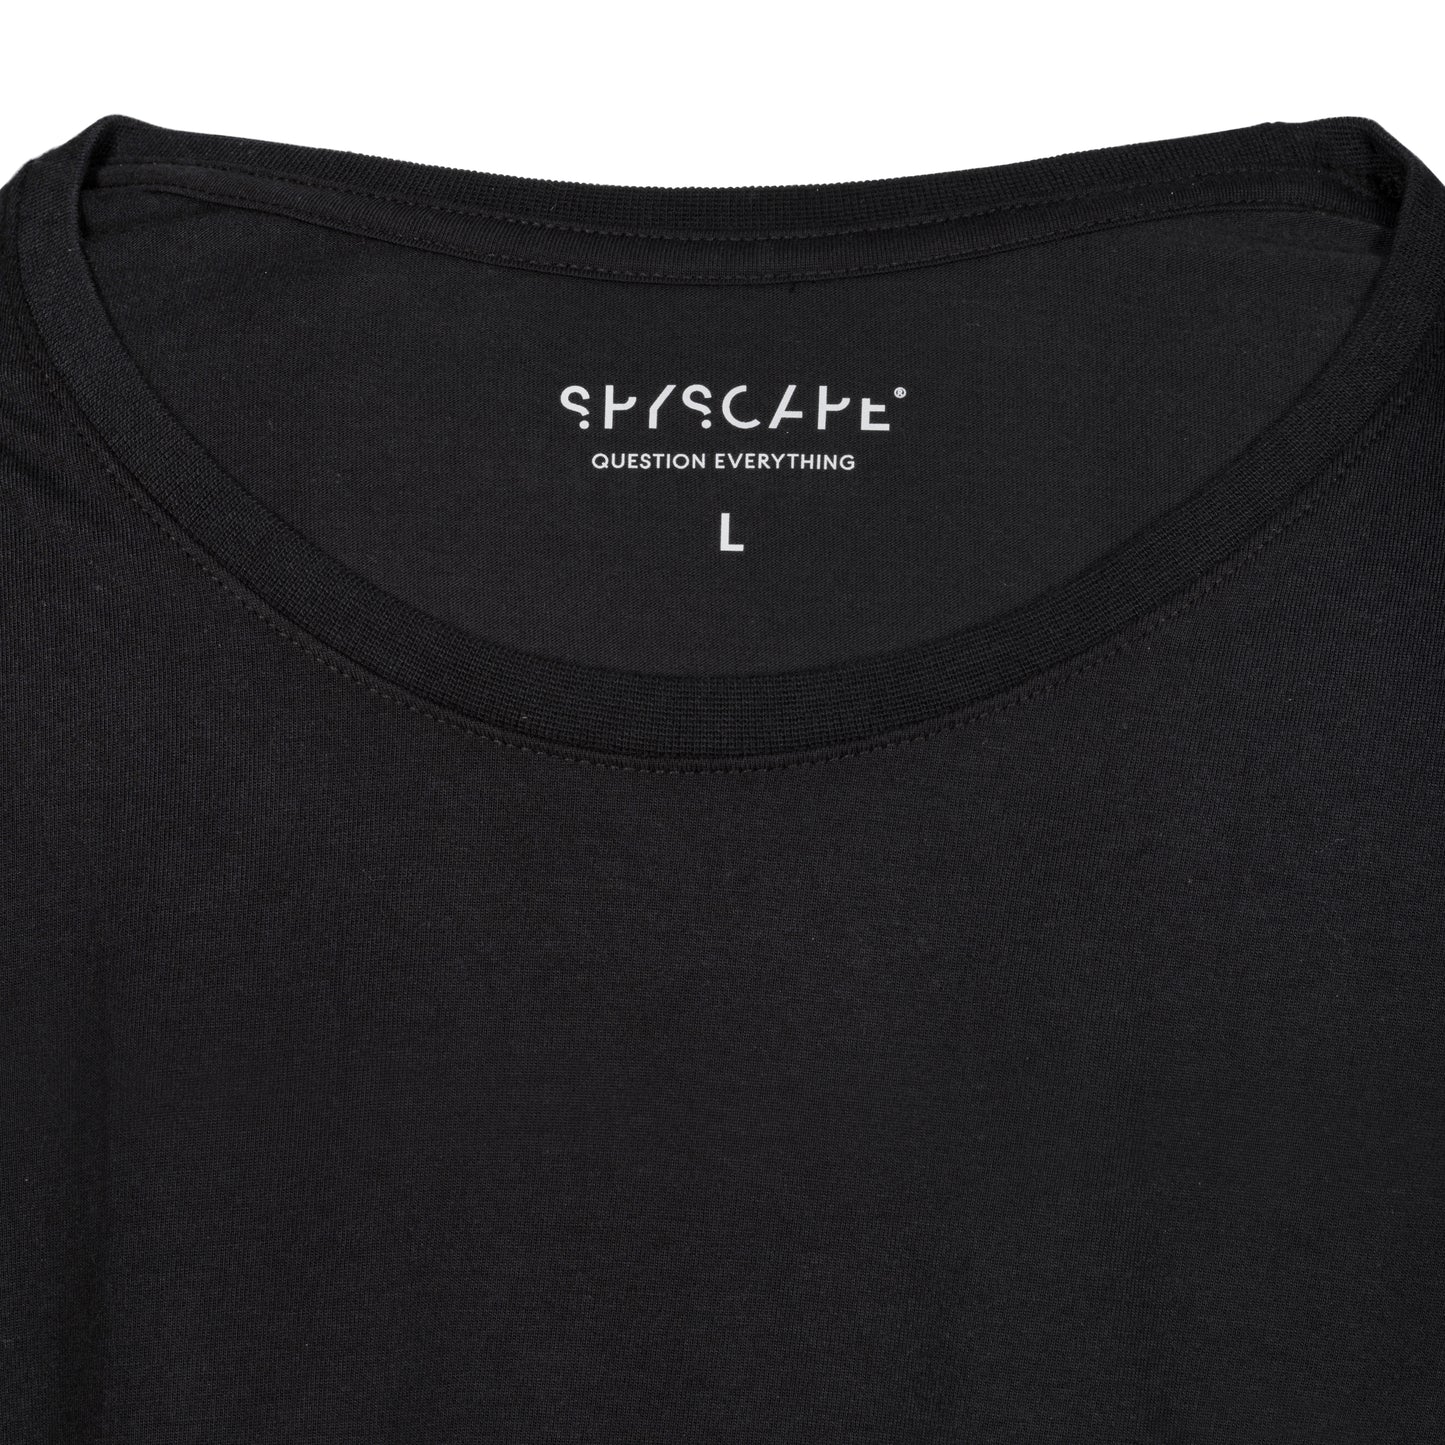 SPYSCAPE Tell the Truth T-Shirt with Hidden Zip Pocket - inner neck label print SPYSACPE Question Everything and t-shirt size